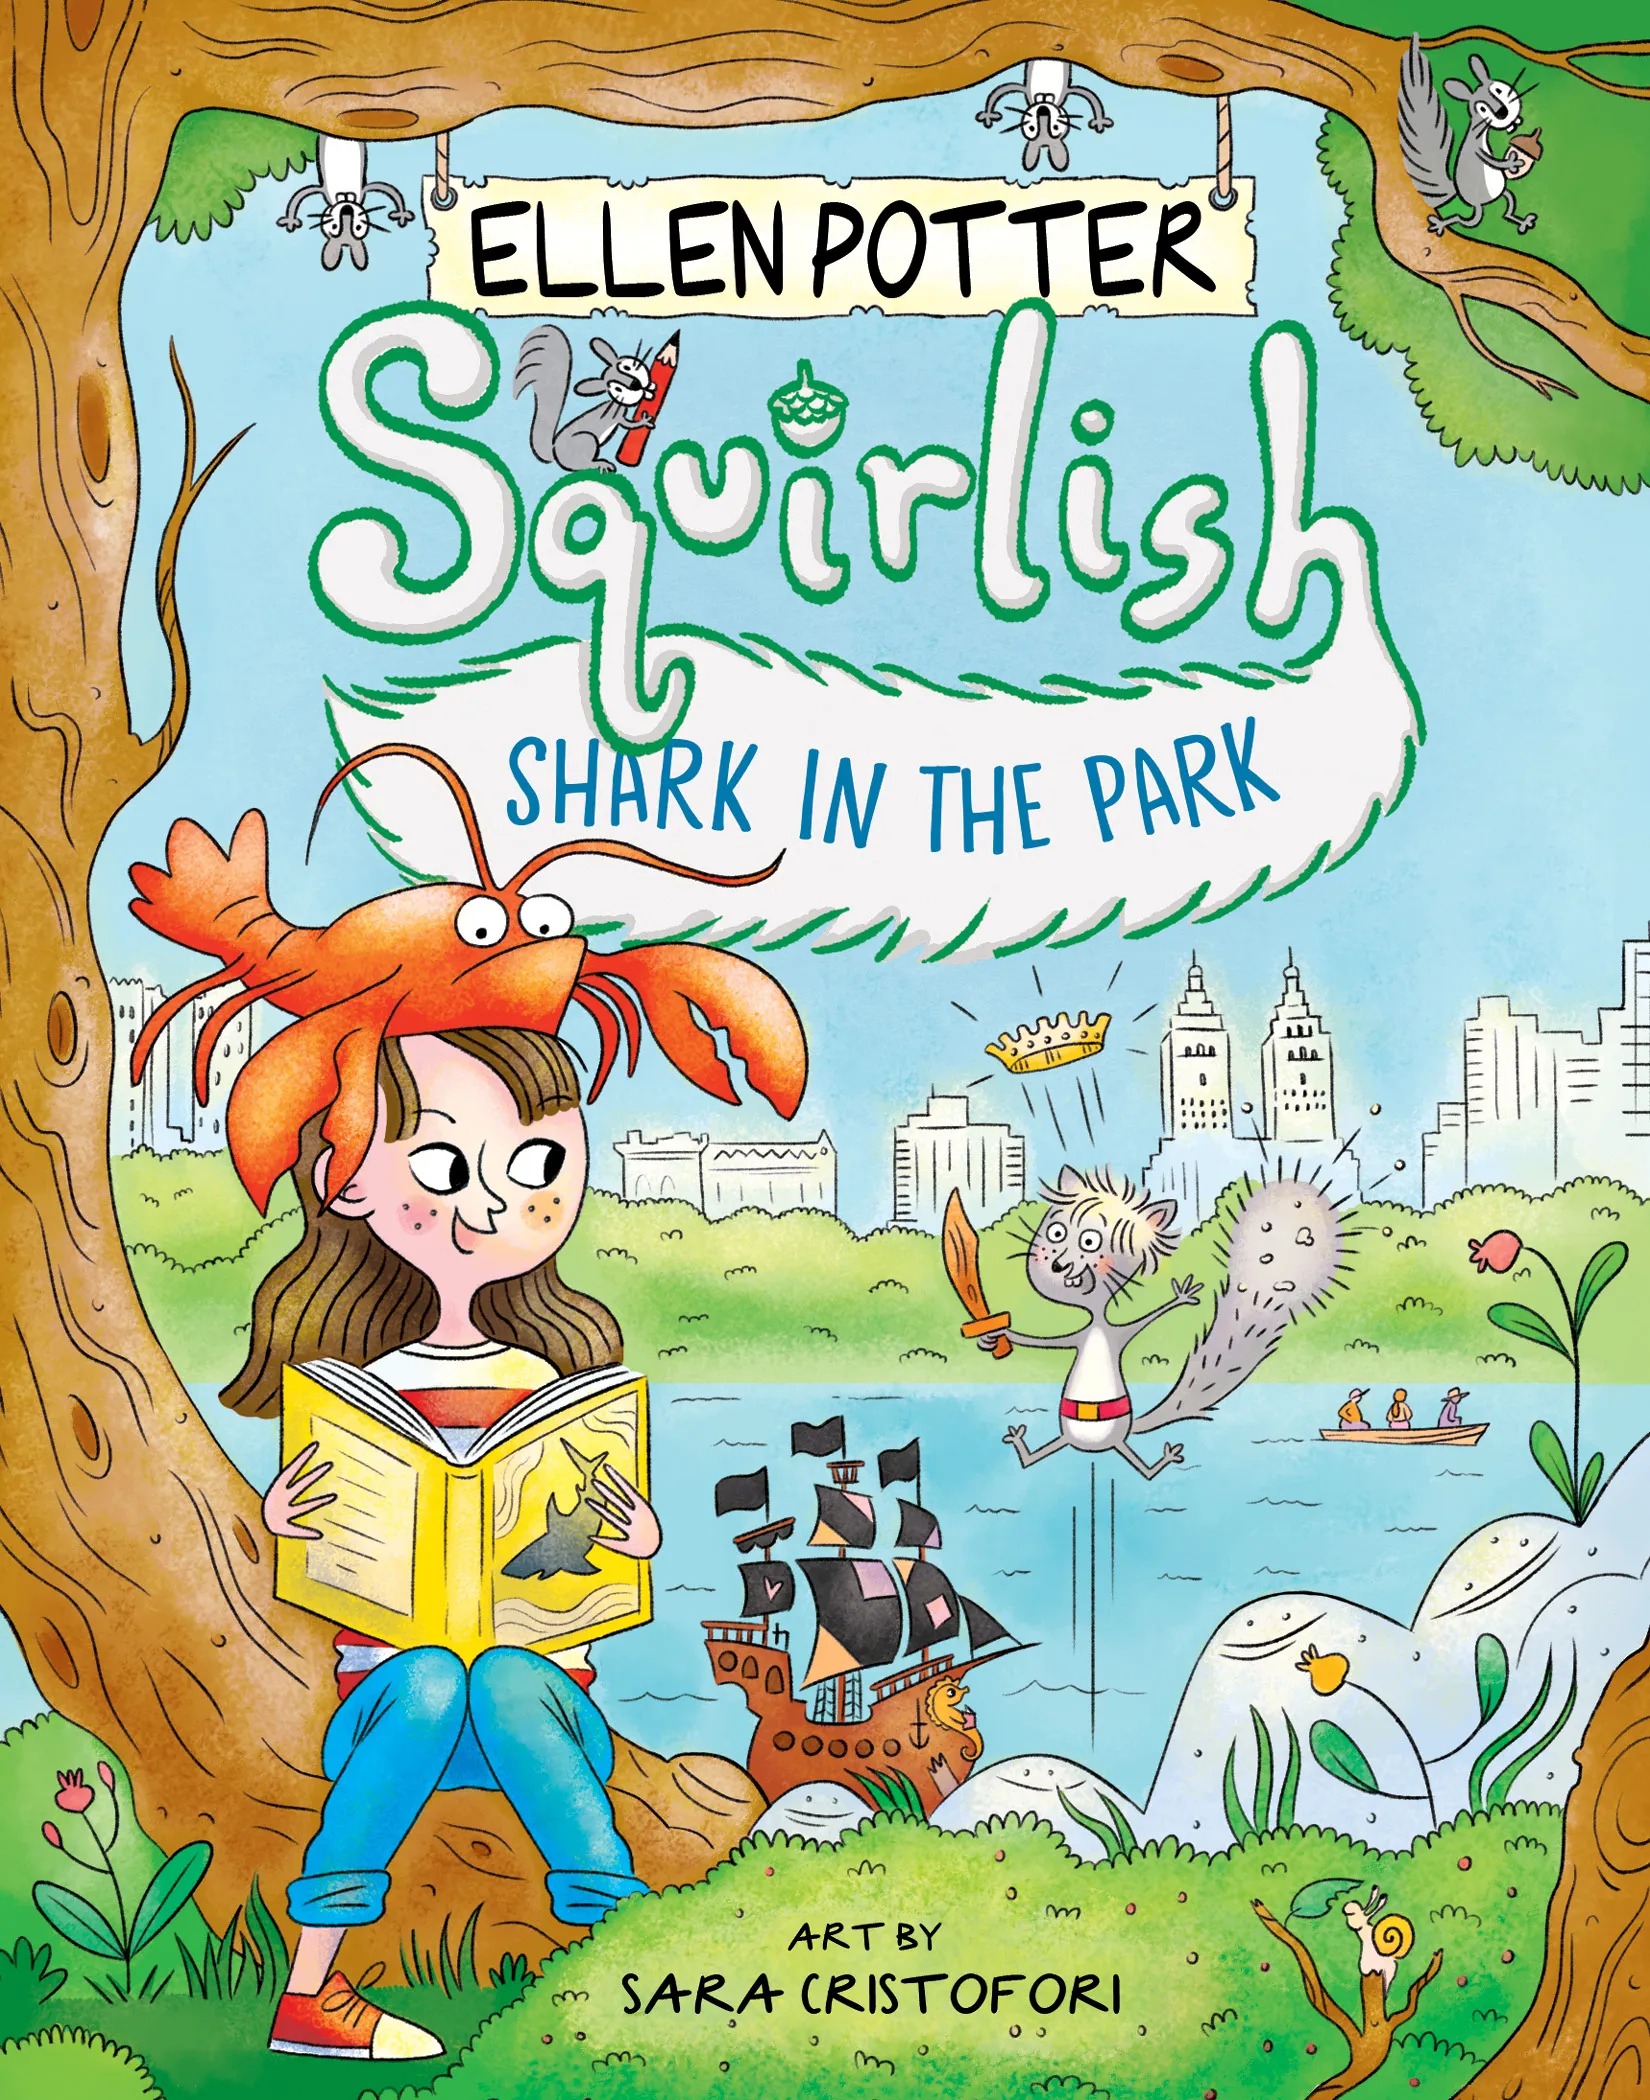 Shark in the Park (Squirlish #2)